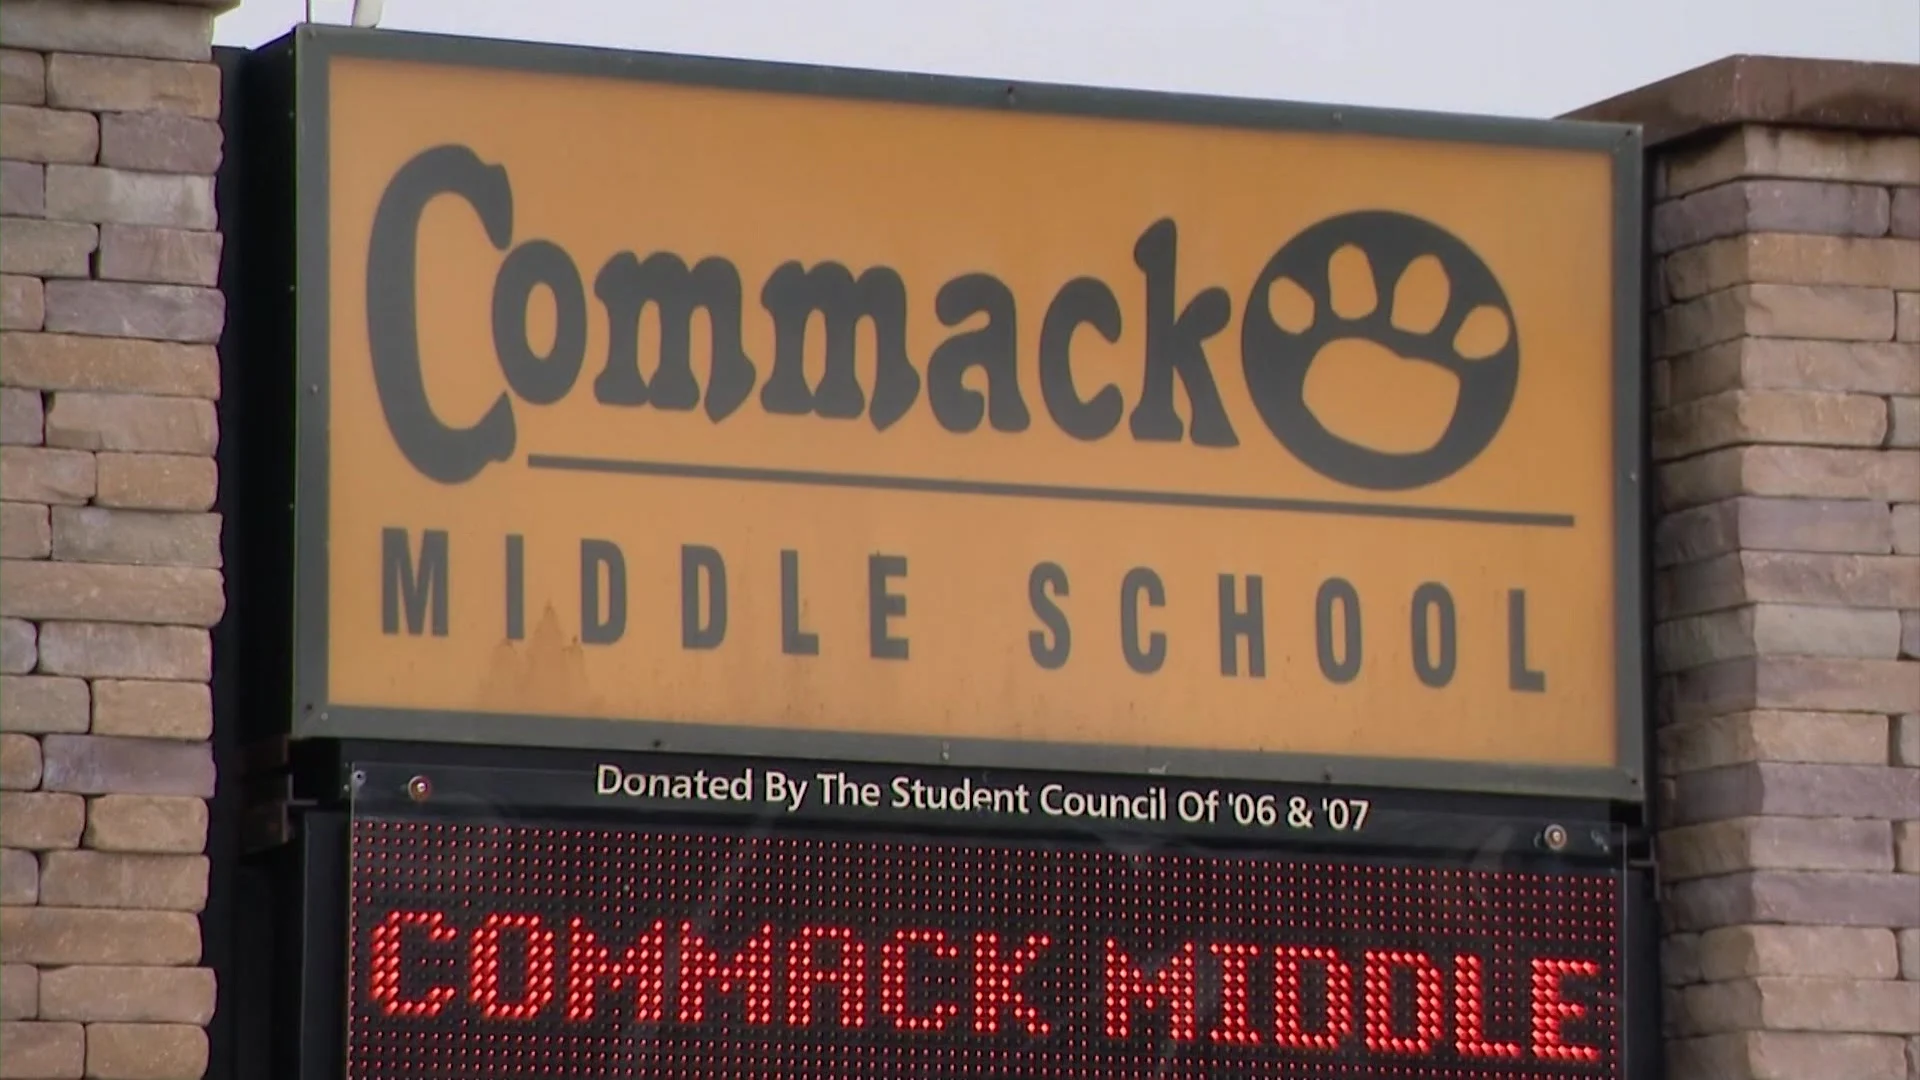 Police Potential Threats At Commack Schools Determined Not To Be Credible 6863